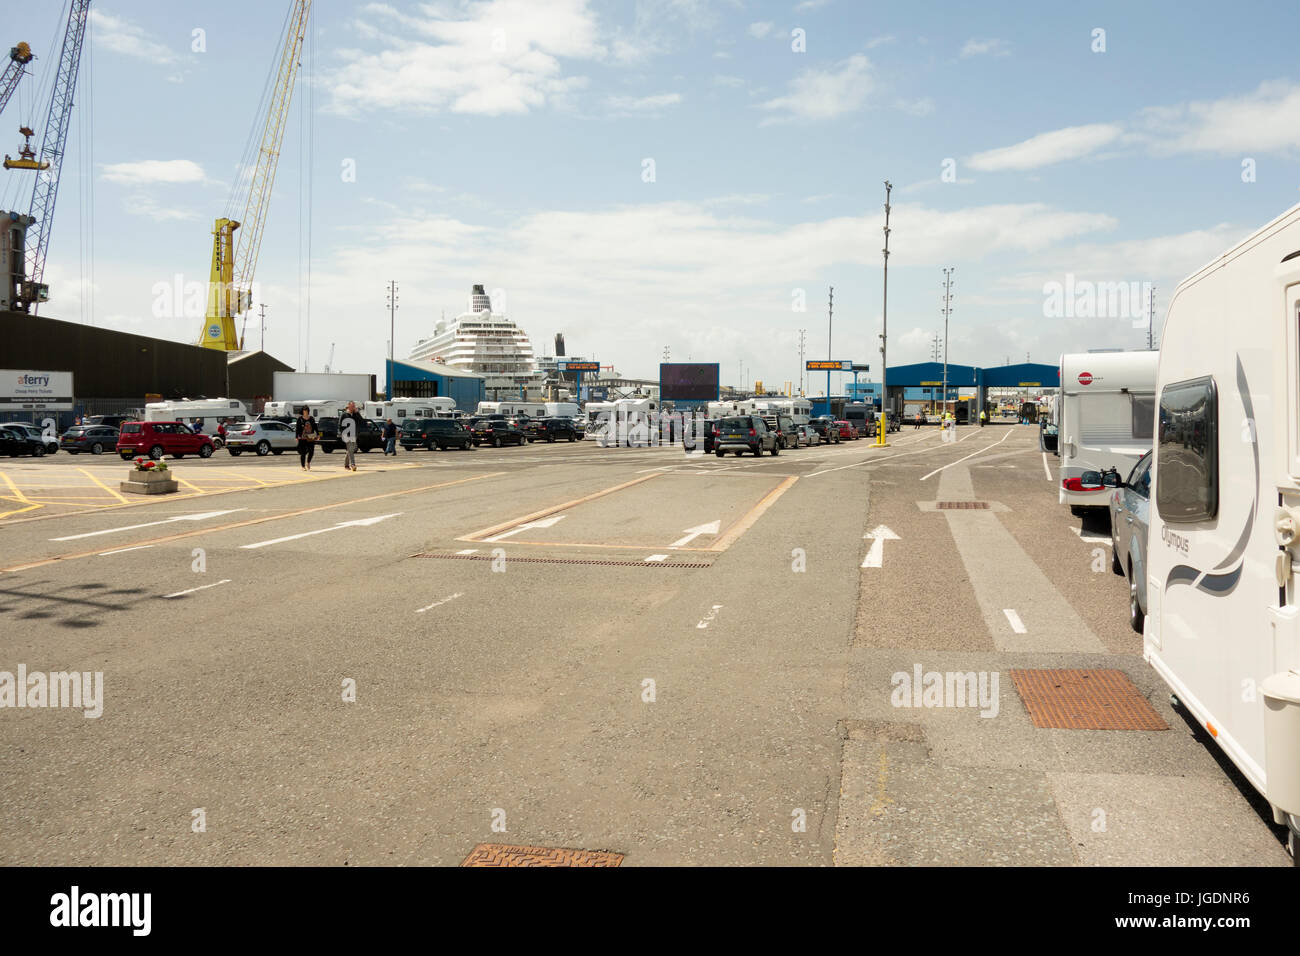 Cars and caravans lined up waiting to board a Brittany Ferries boat in Portsmouth Stock Photo